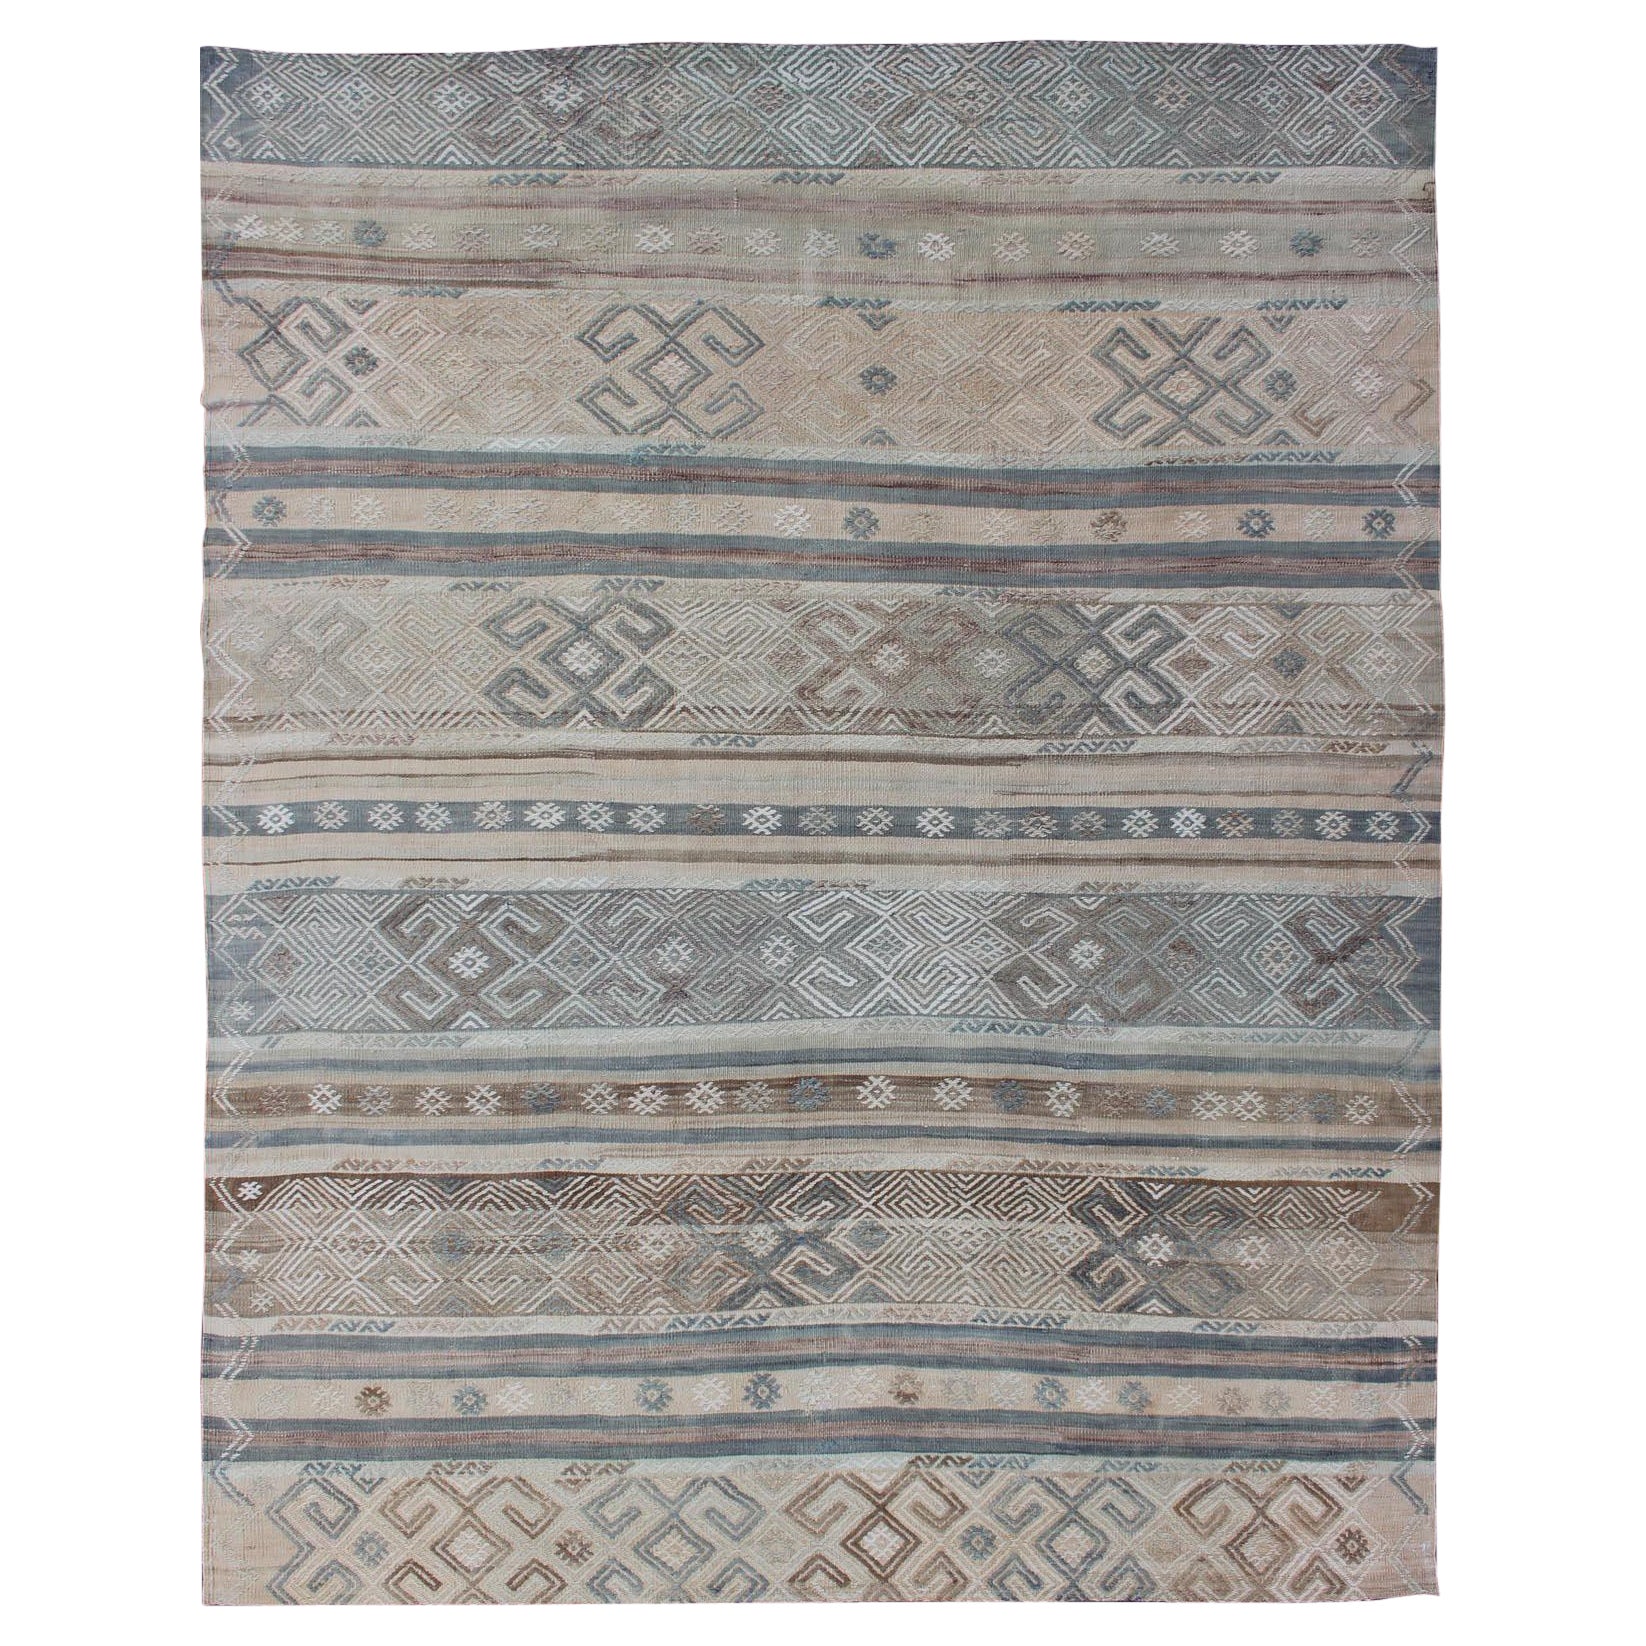 Striped Hand Woven Turkish Vintage Kilim with Geometric Designs For Sale